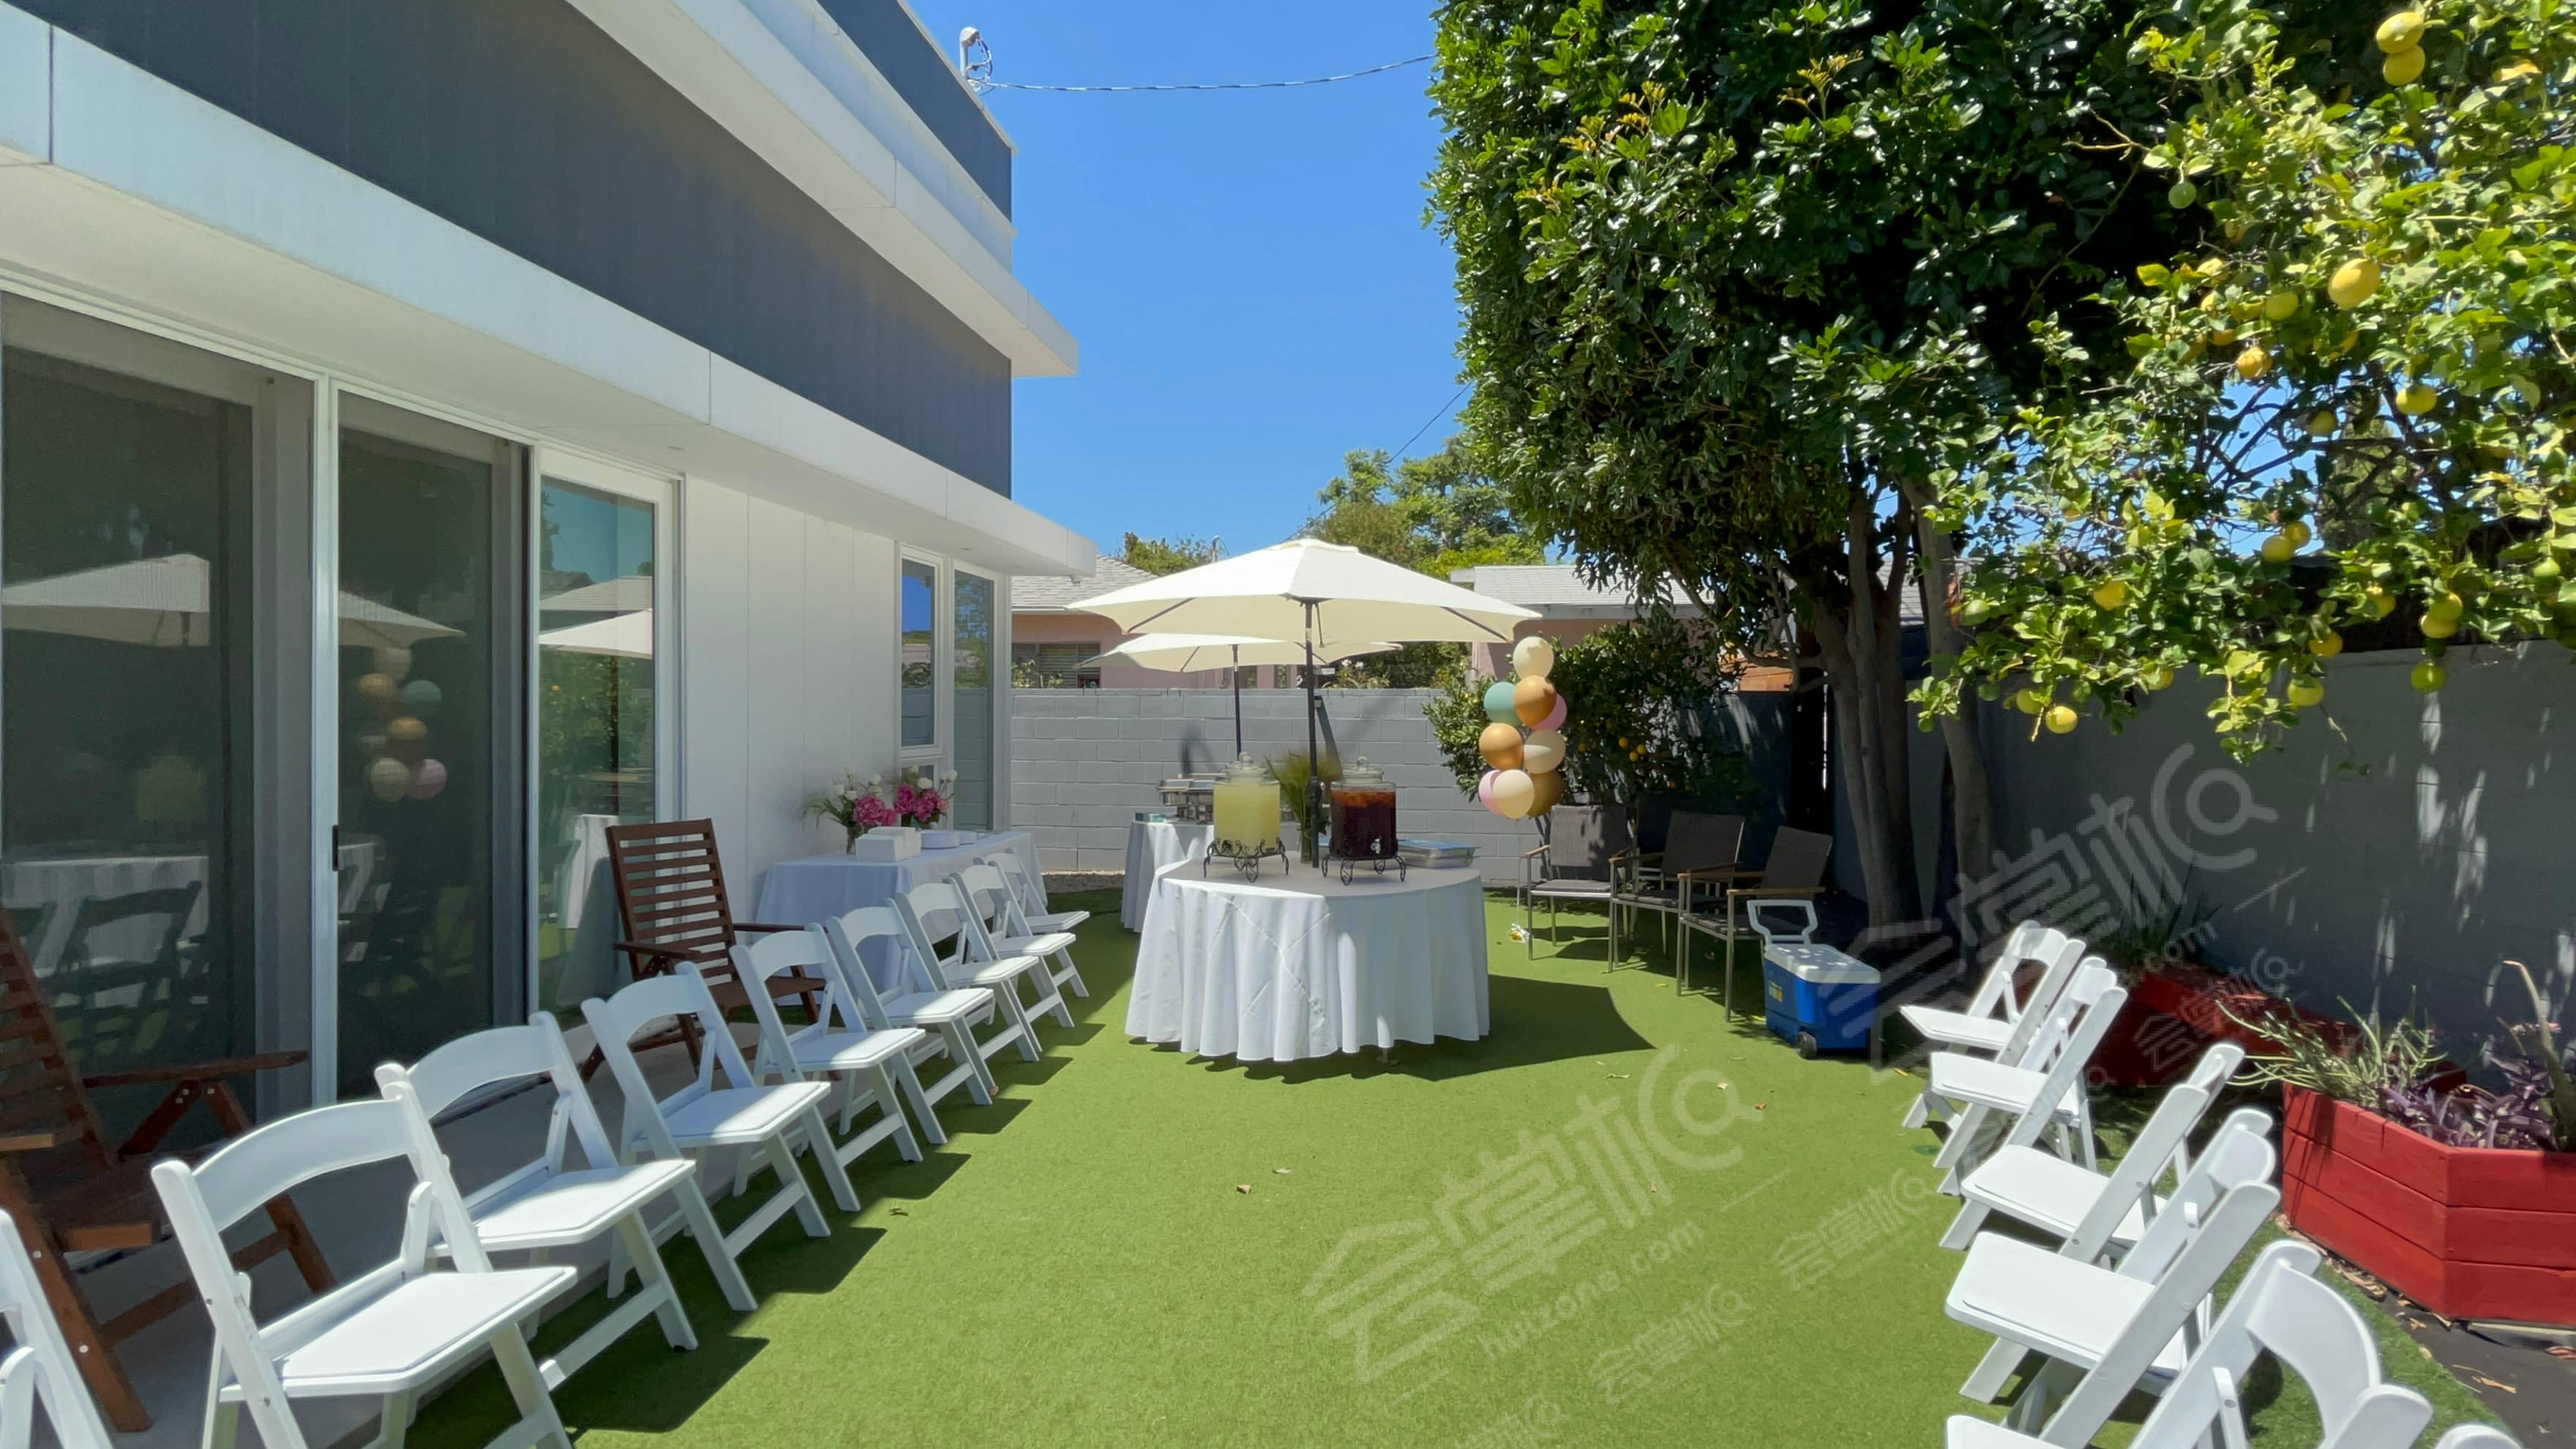 Modern Culver City Outdoor Event Space (Shaded), Garden Feel, Party, Production Space, Celebrations